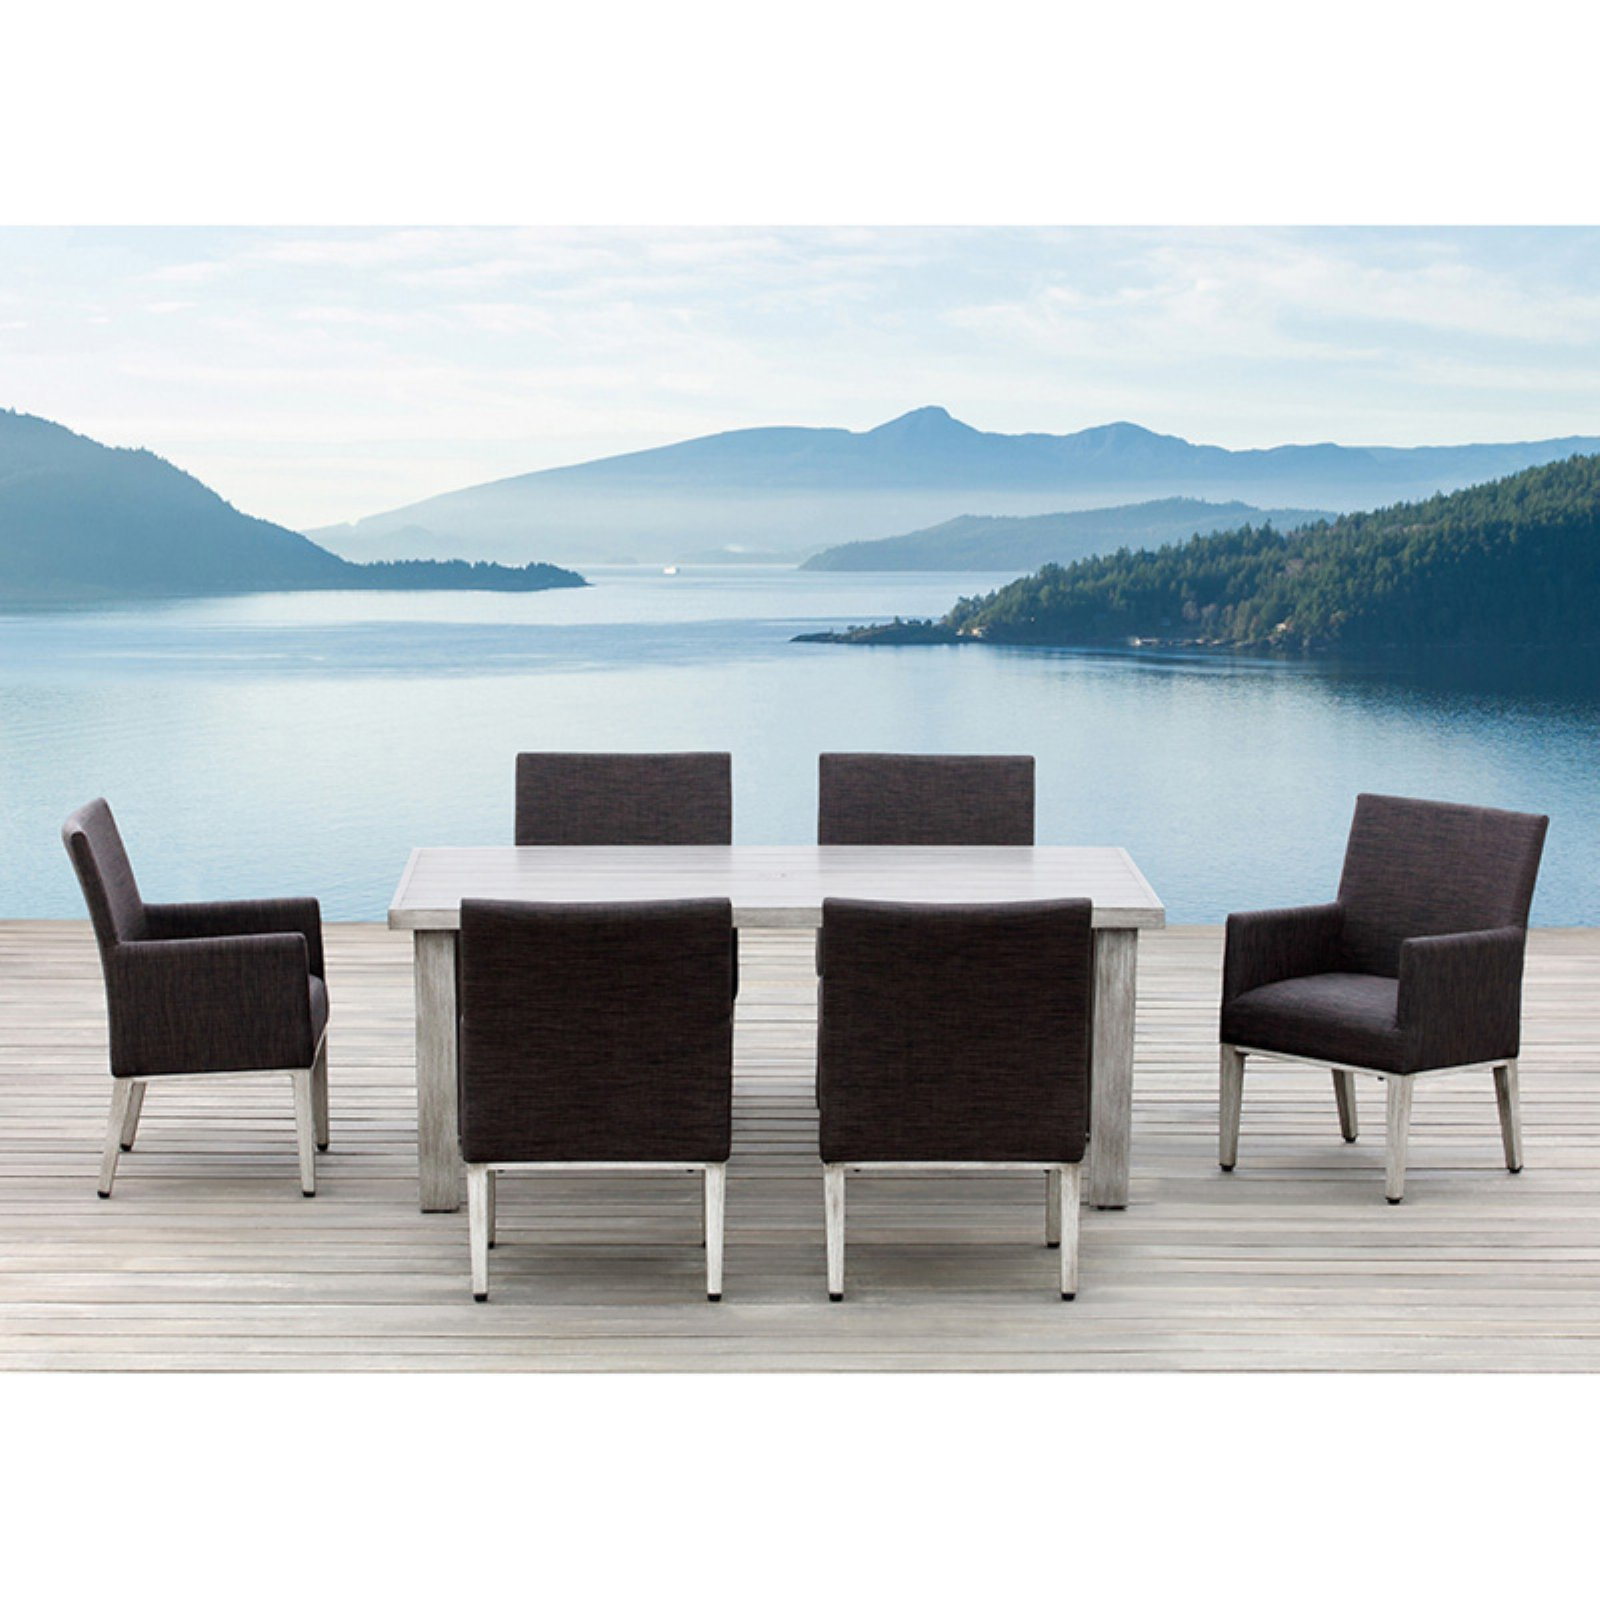 Outdoor Ove Decors Montreal 7 Piece Patio Dining Set In 2019 with regard to sizing 1600 X 1600